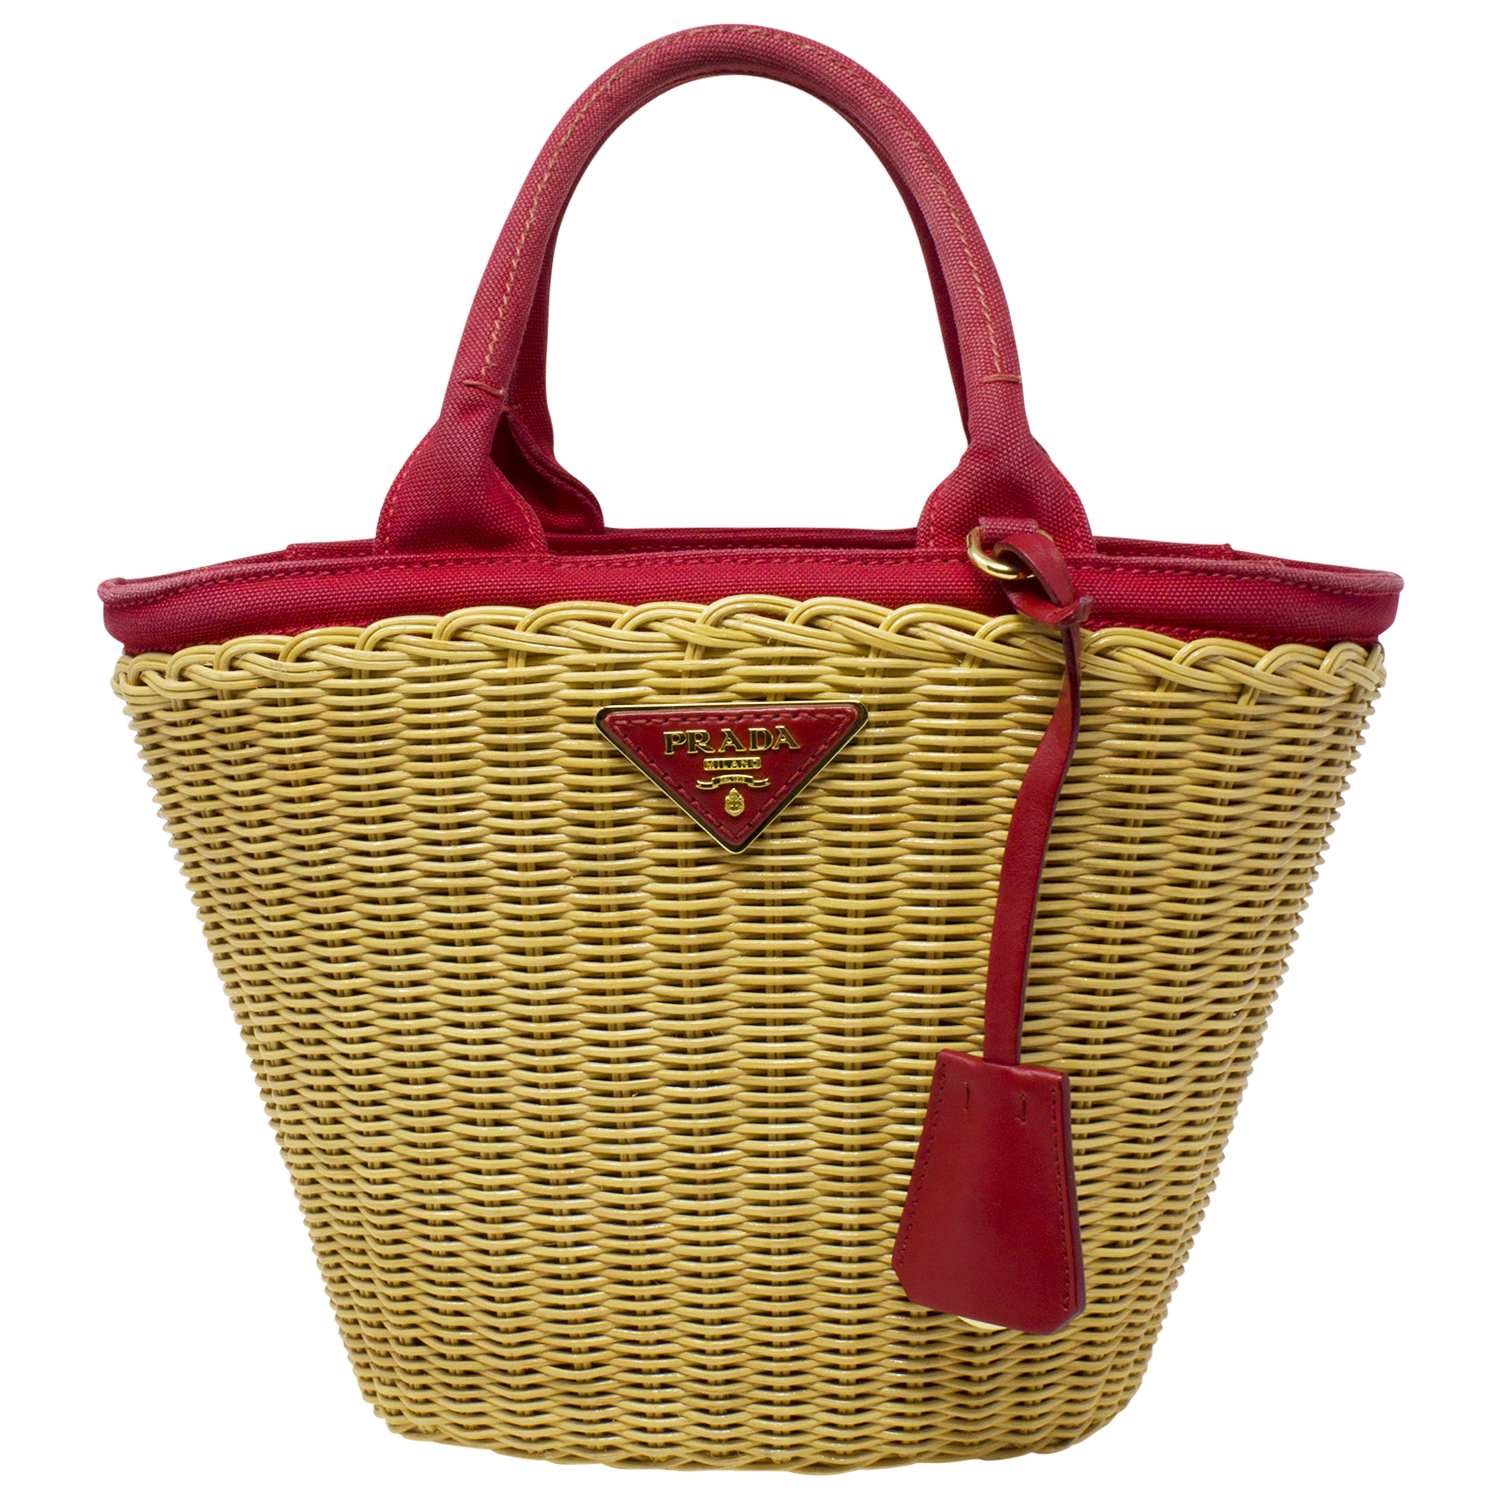 Prada Beige Wicker and Red Canvas Trimmed Tote